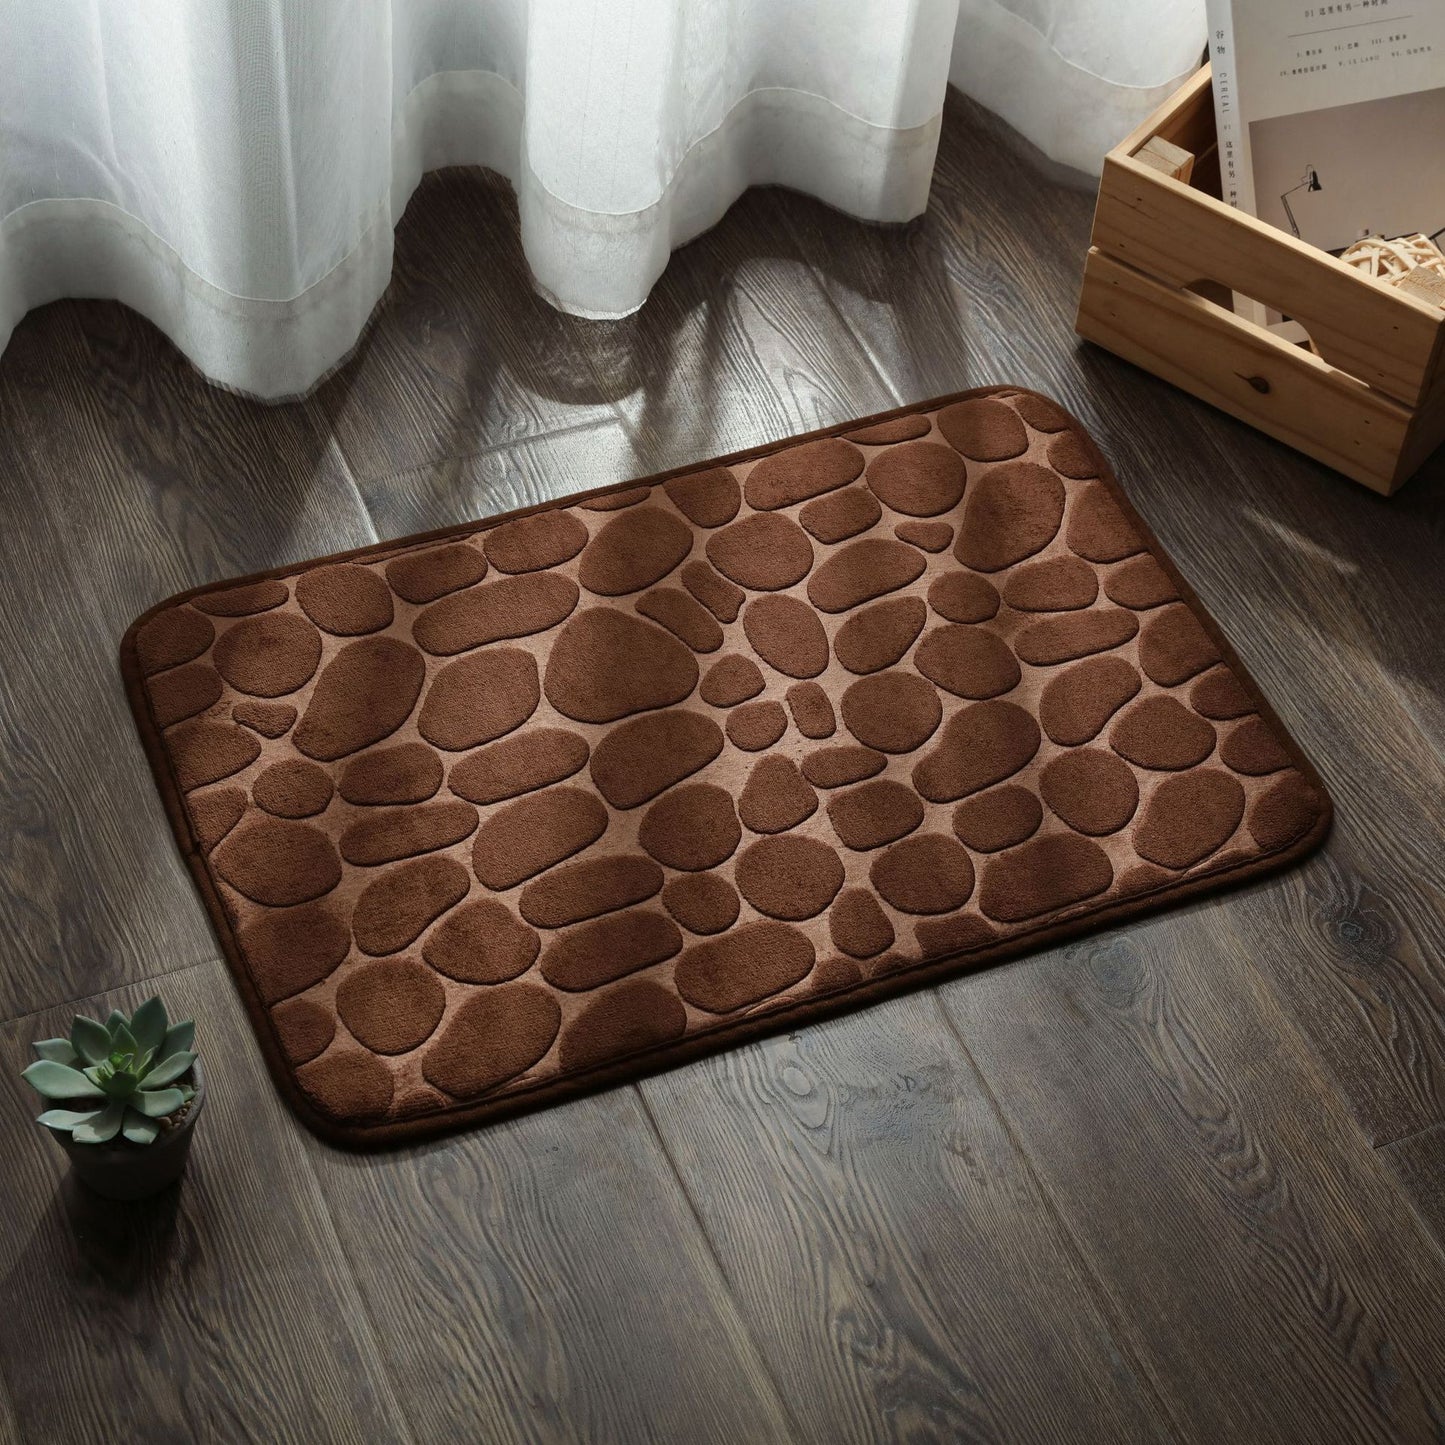 1pc Cobblestone Embossed Floor Mat, Non Slip Water Absorption BathMat, Soft And Cozy Toilet Mat, 4 Color Options, Bathroom Accessories